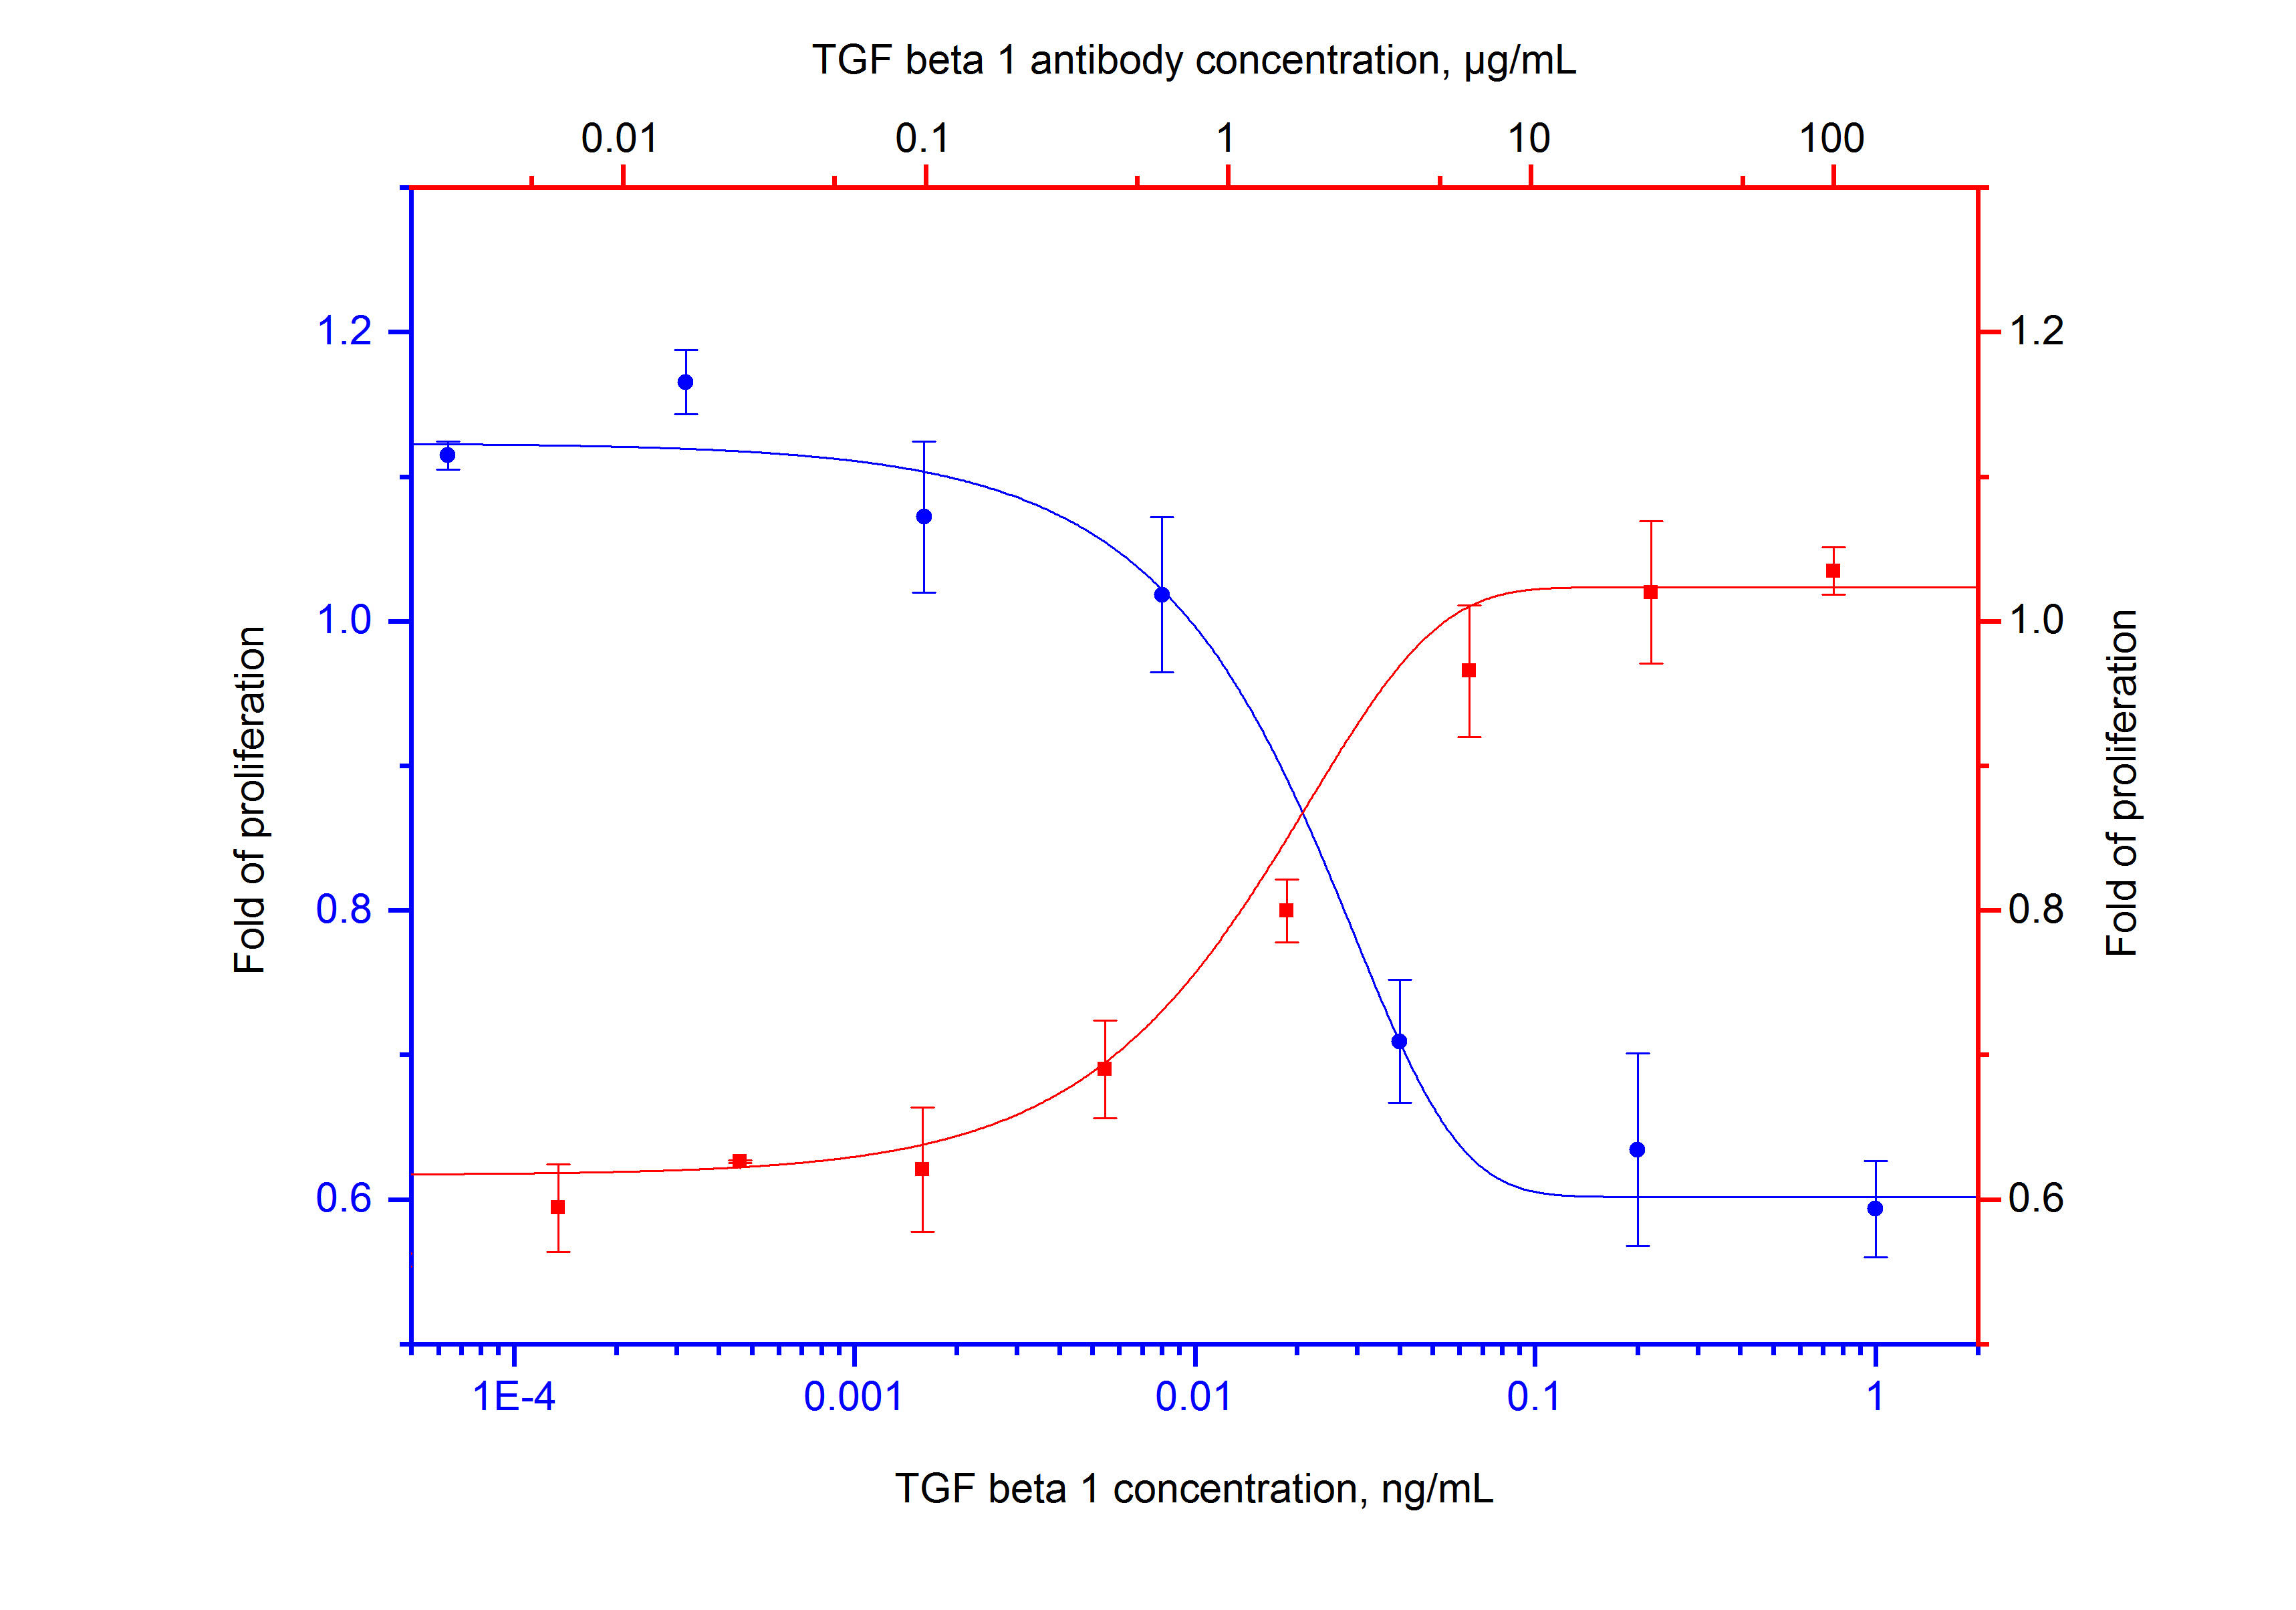 Recombinant human TGF beta 1 (Cat.NO. HZ-1011) inhibits IL-4 induced proliferation of mouse HT-2 cells in a dose dependent nammer (blue curve, refer to bottom X-left Y). The activity of human TGF beta 1 (0.03 ng/mL HZ-1011) is neutralized by mouse anti-human TGF beta 1 antibody 69012-1-Ig at serial dose (red curve, refer to top X-right Y). The ND50 is typically 0.5-2 μg/mL